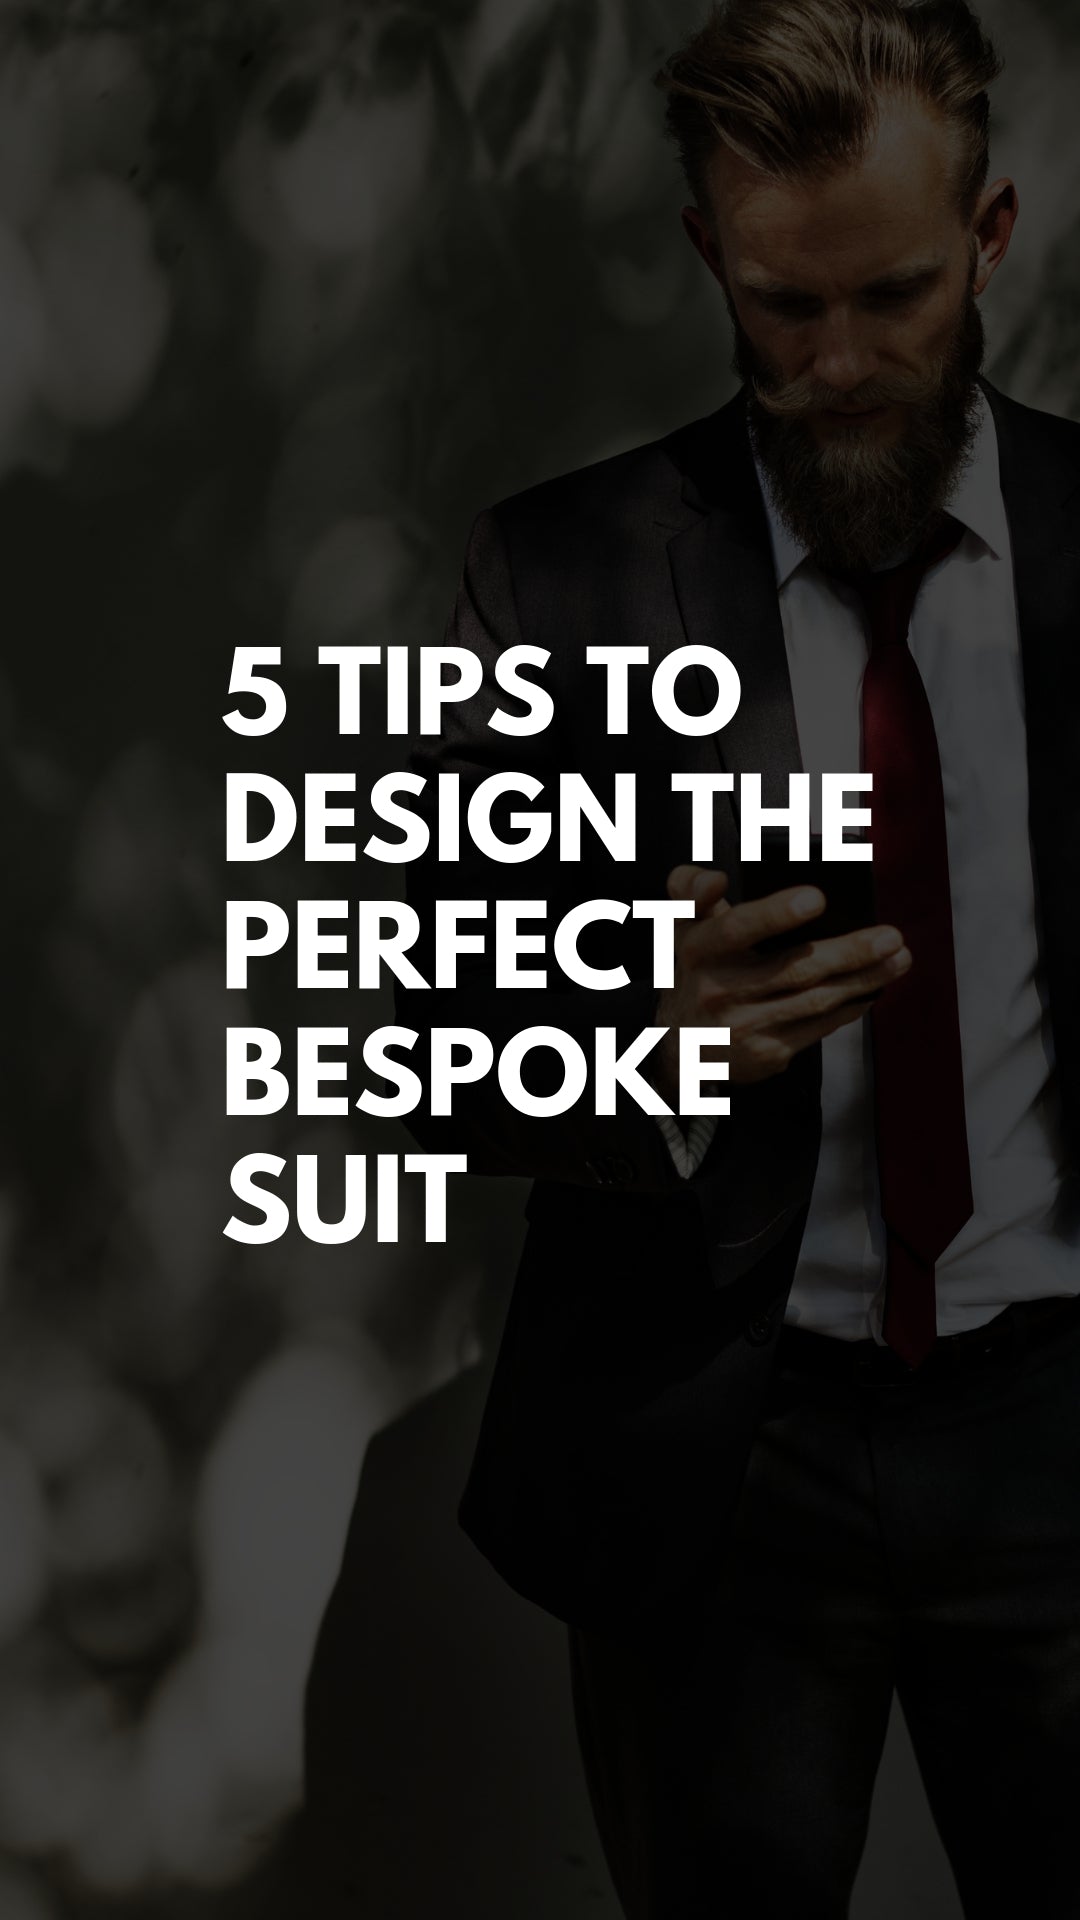 5 Tips To Design The Perfect Bespoke Suit